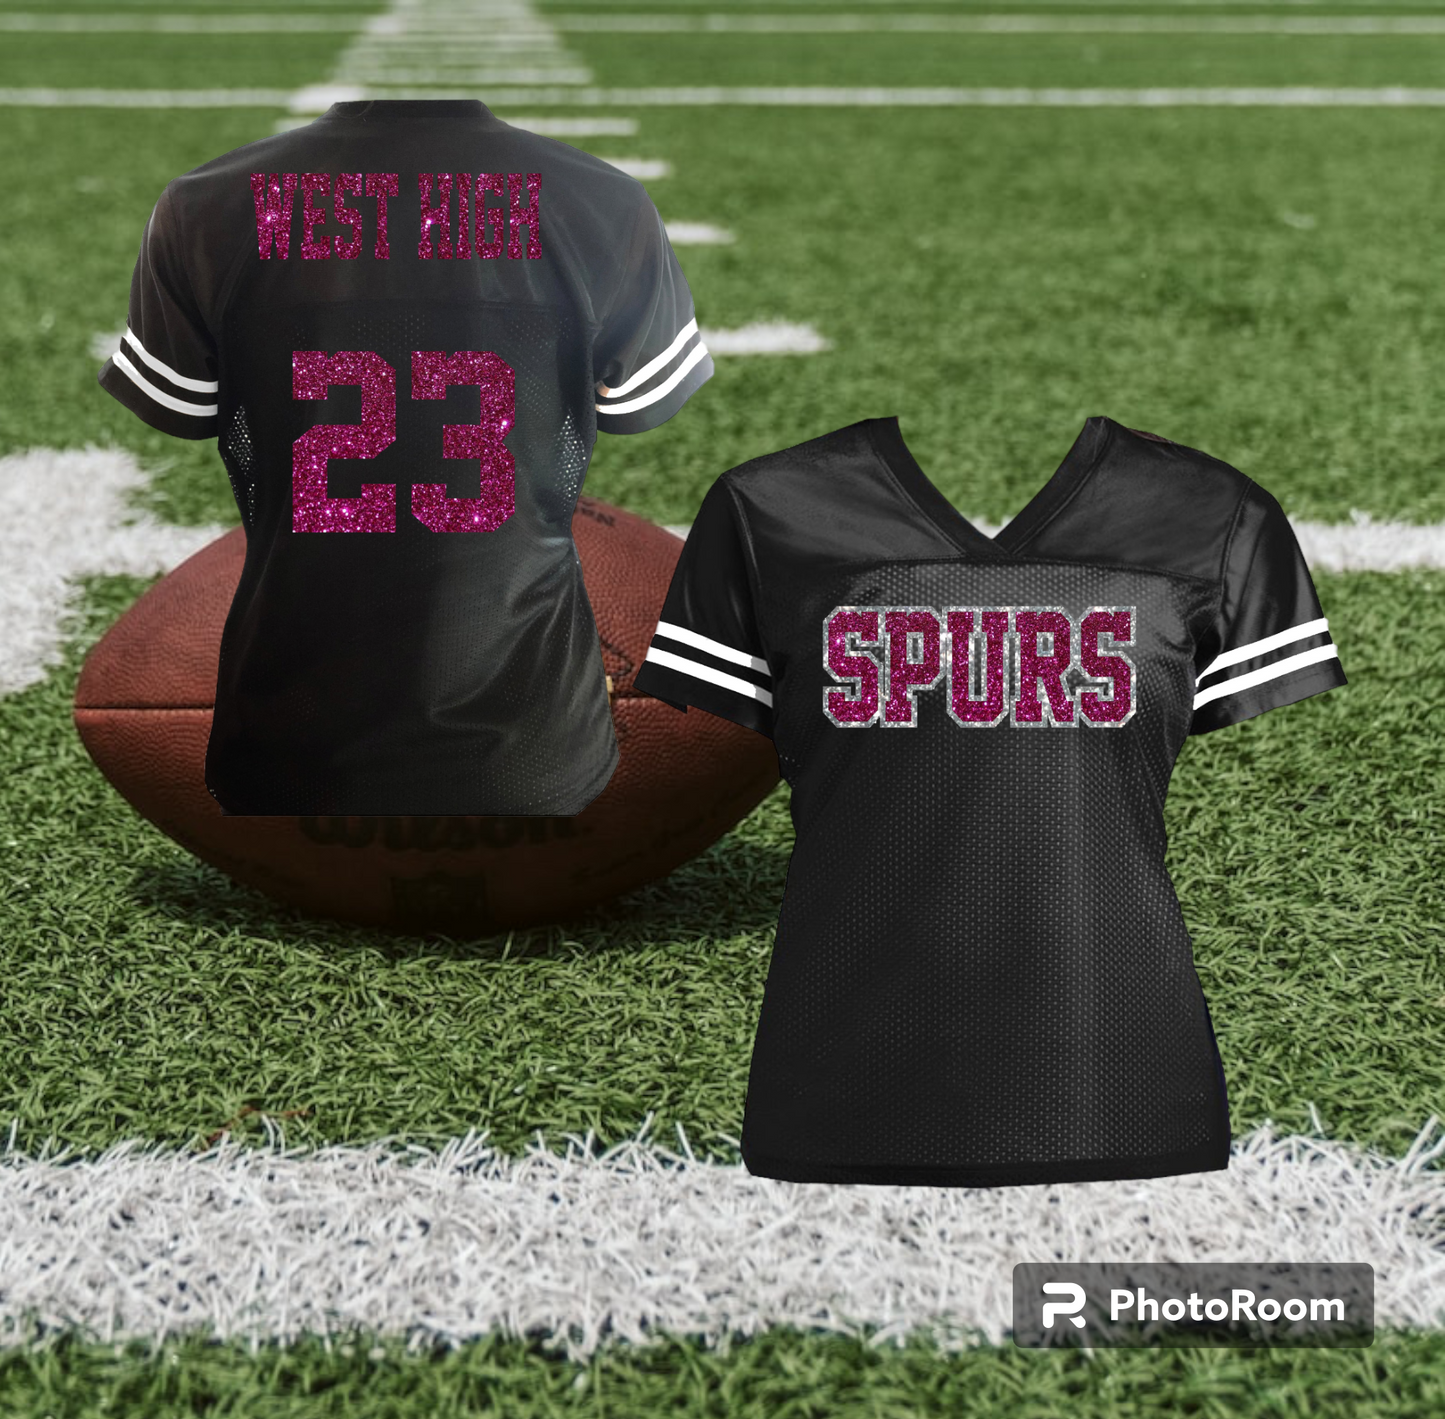 Your Design Glitter Football Jersey with Personalized Name & Number